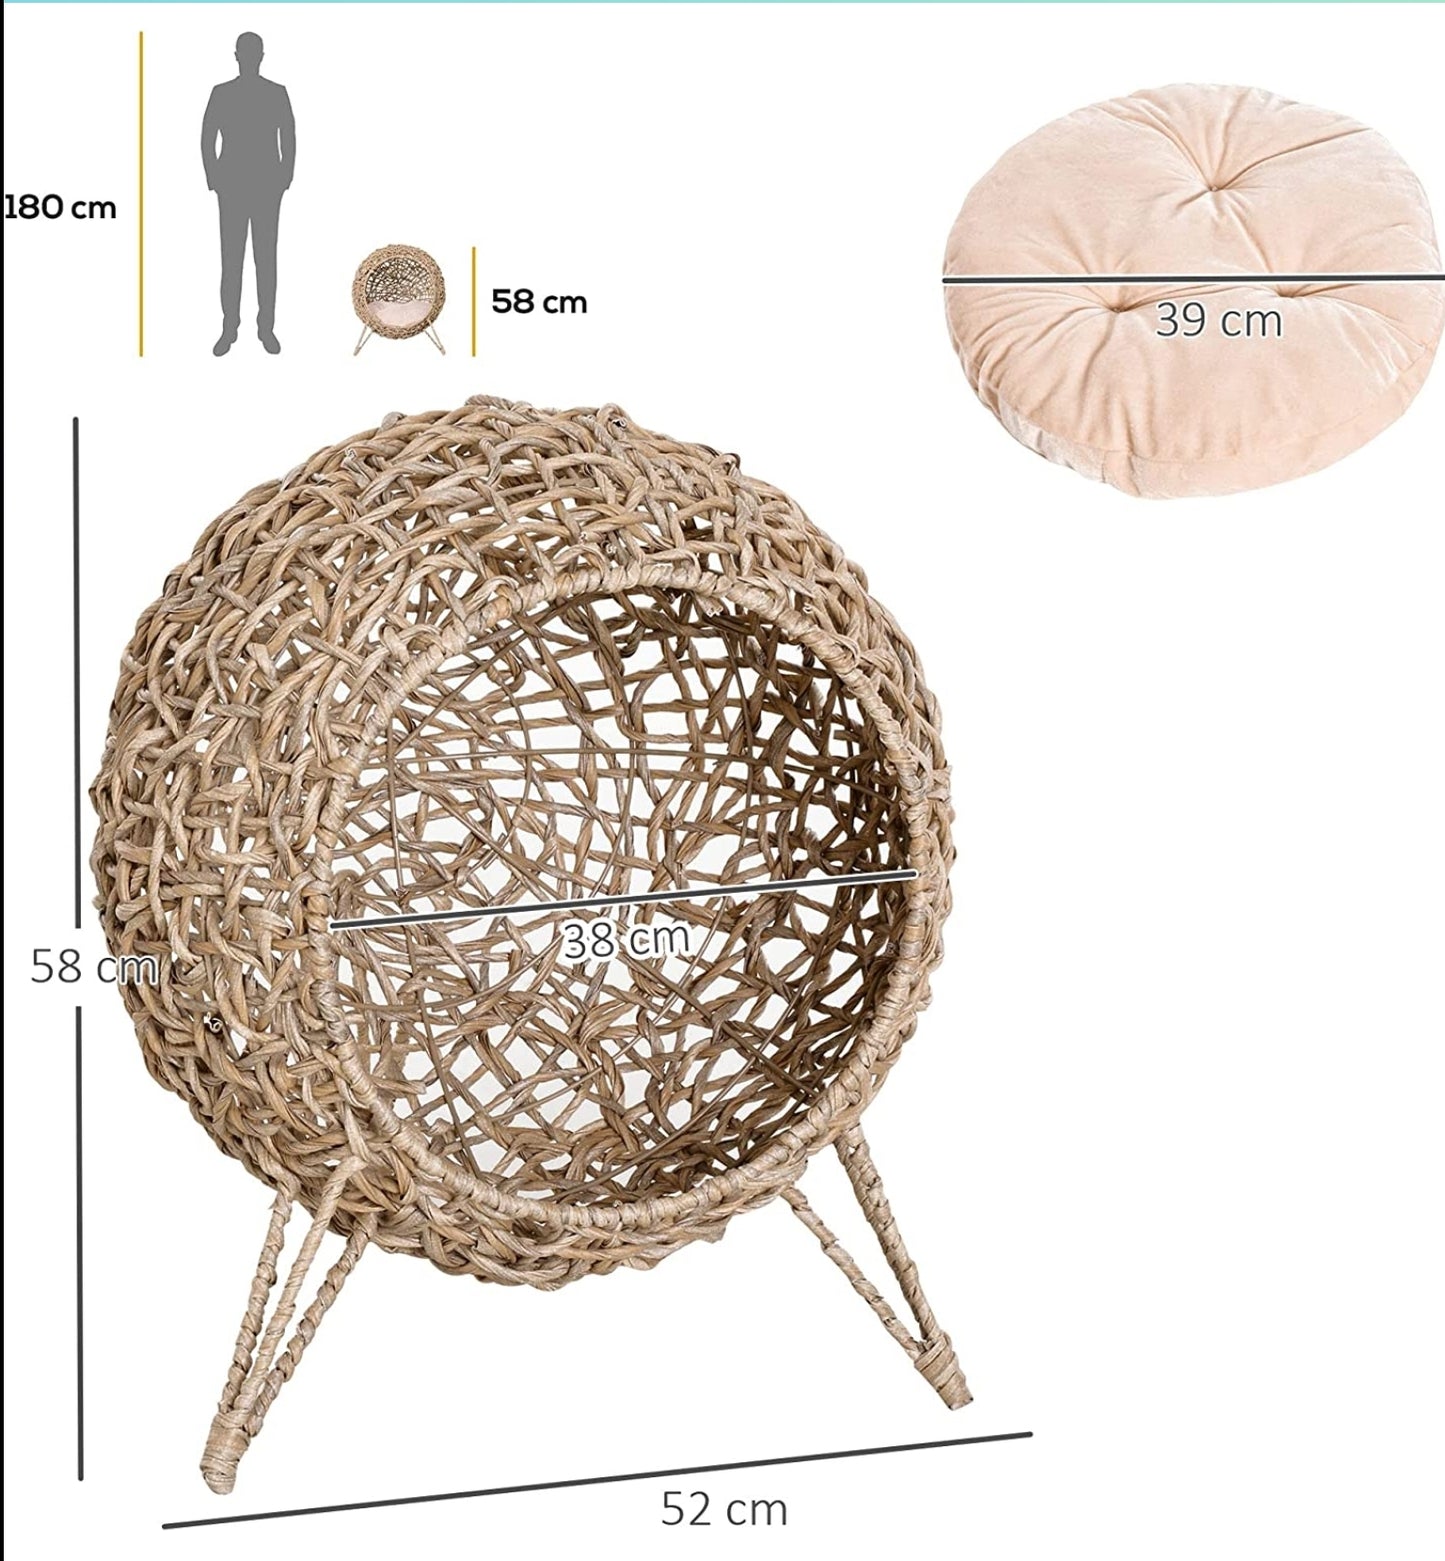 PawHut Wicker Cat House, Rattan Elevated Cat Bed with Three Tripod Legs, Ball-Shaped Cat Basket with Cushion